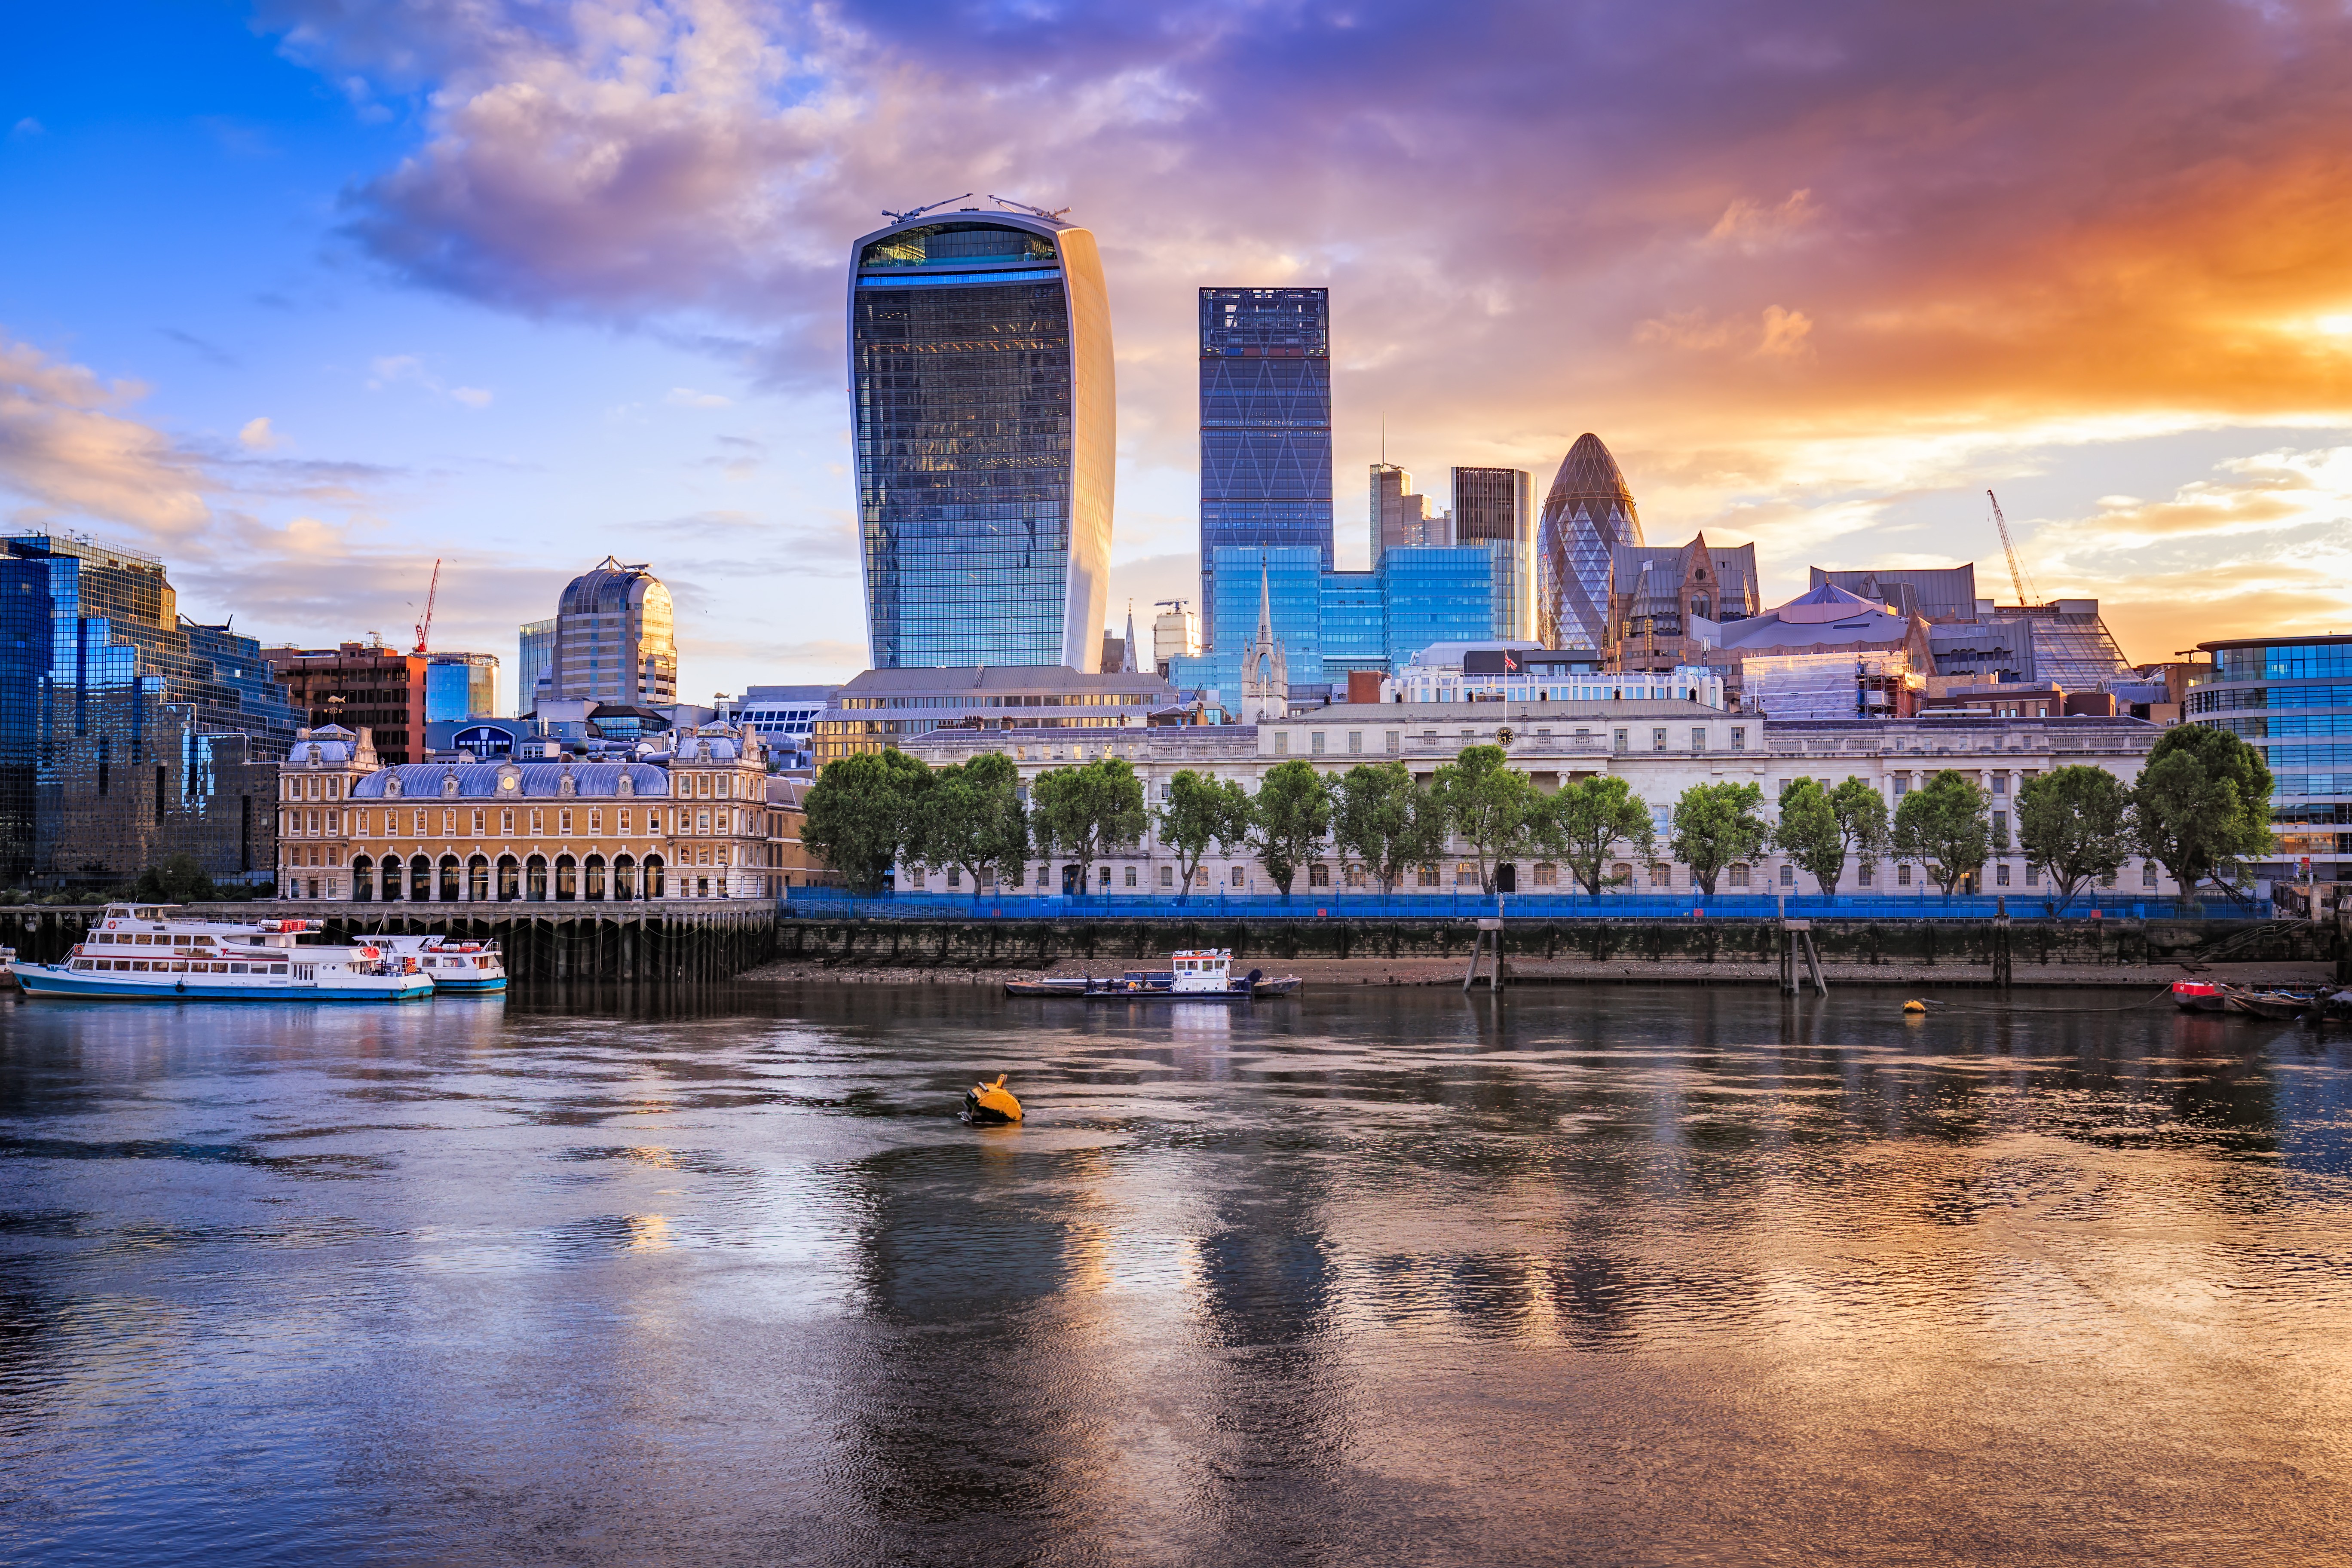 Hong Kong companies have been snapping up London property this year. Photo: Shutterstock